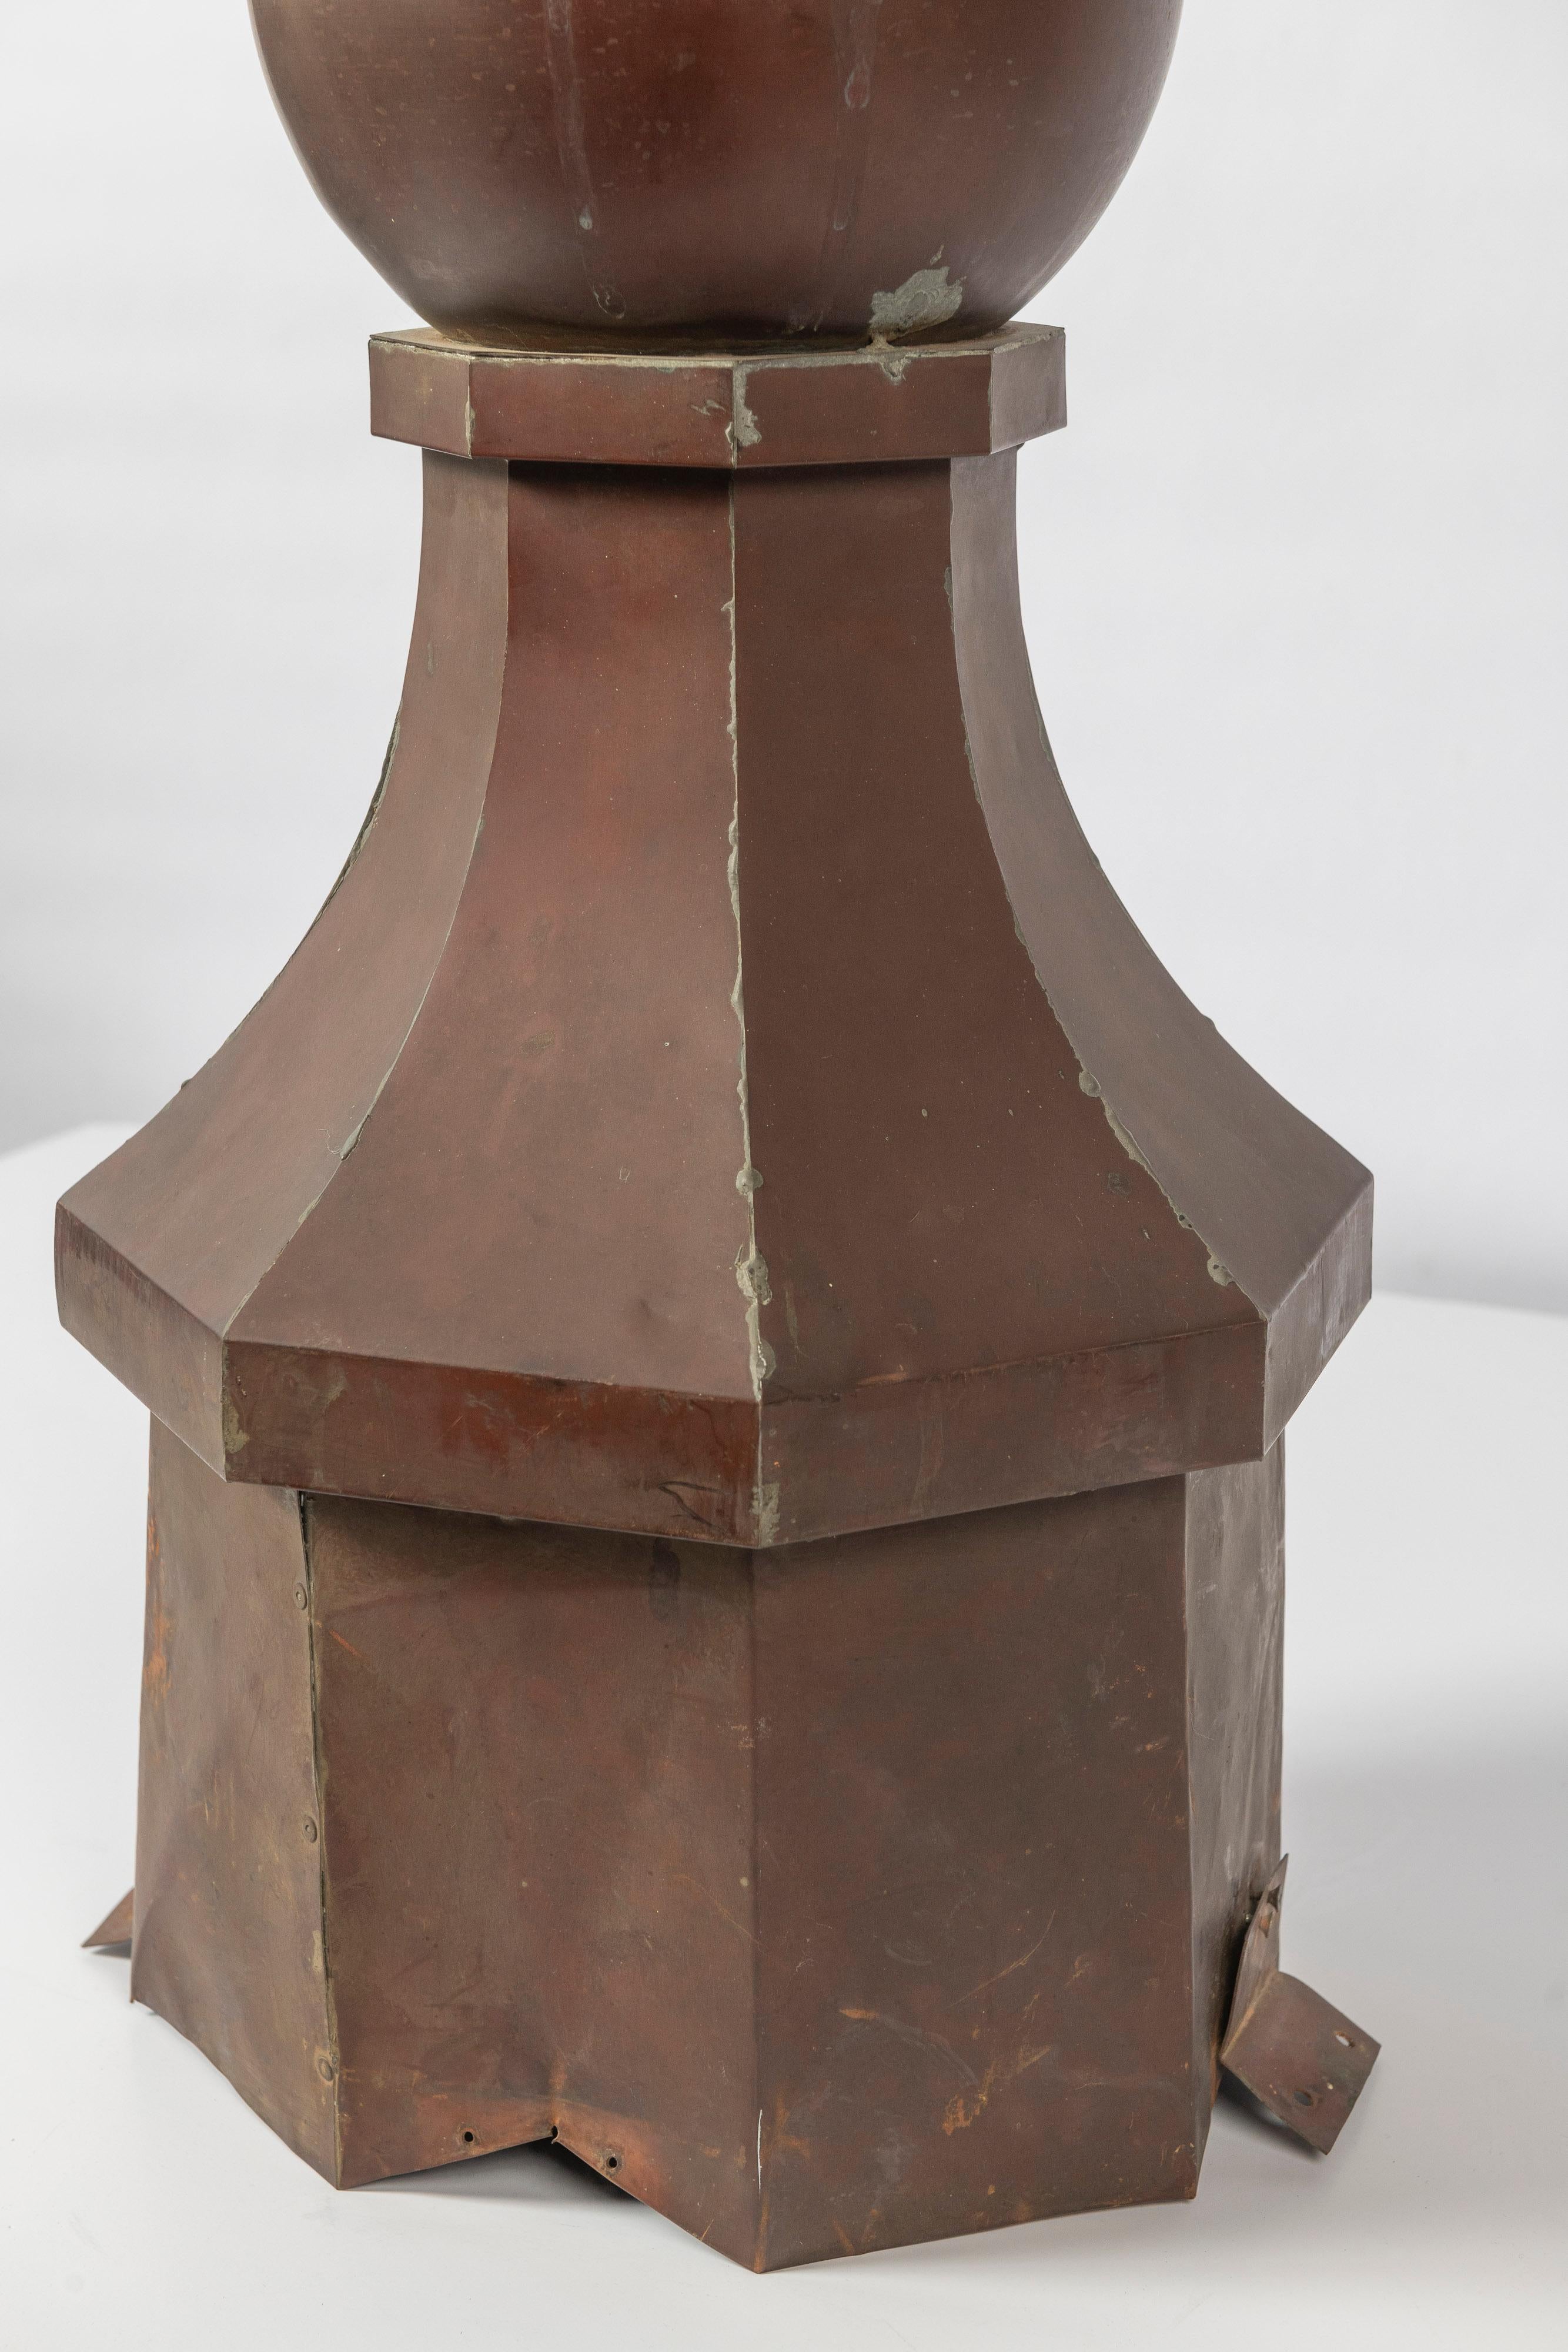 American Antique Architectural Copper Spire with Hexagonal Base